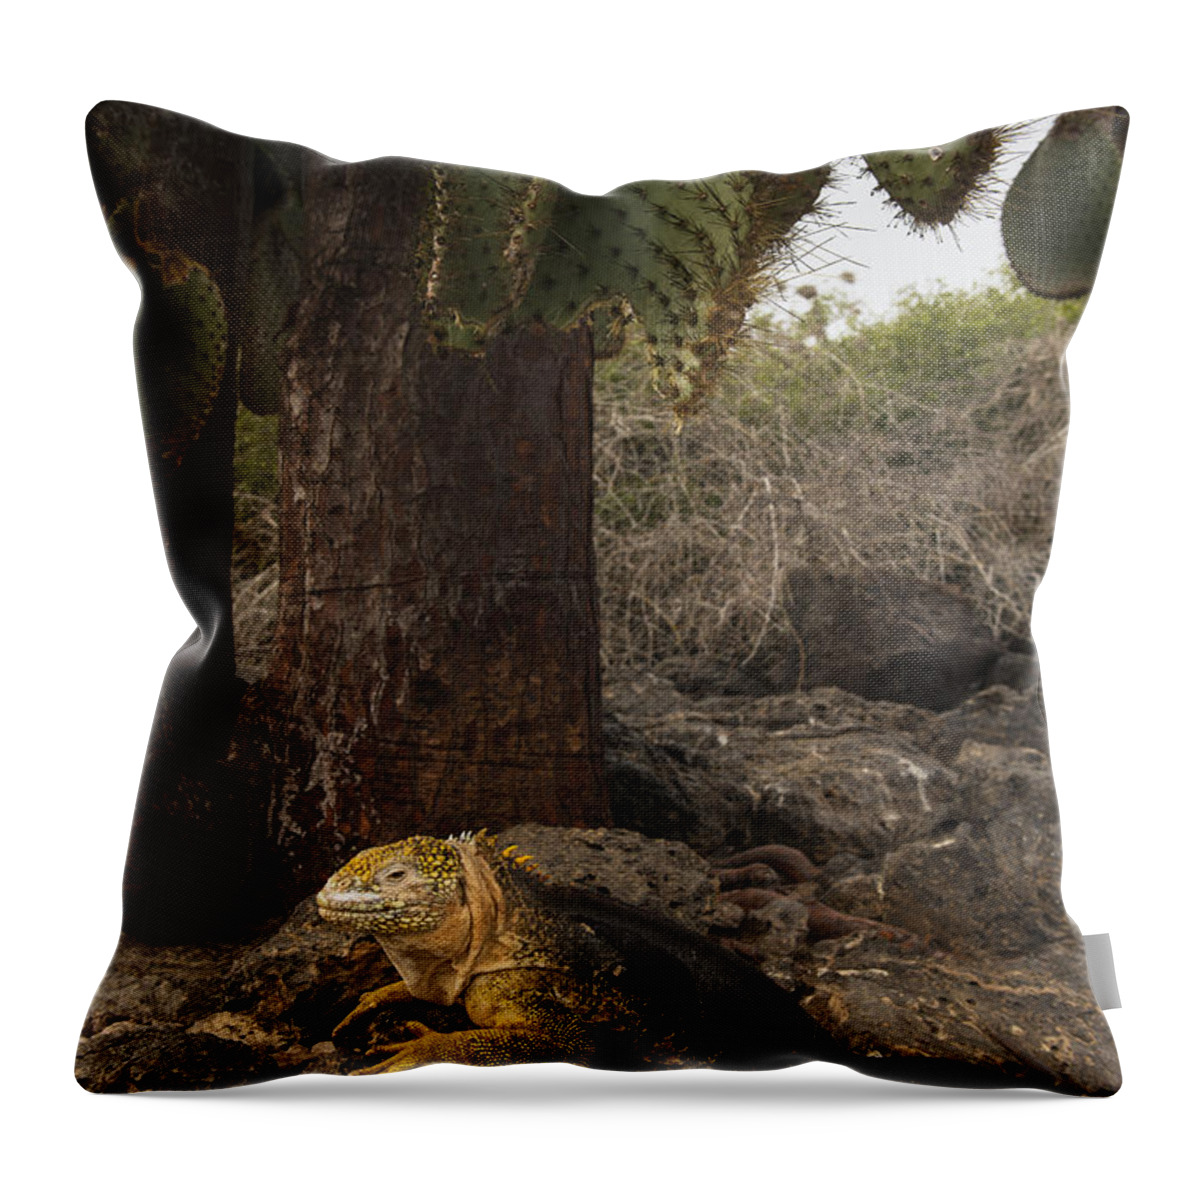 Pete Oxford Throw Pillow featuring the photograph Galapagos Land Iguana South Plaza by Pete Oxford